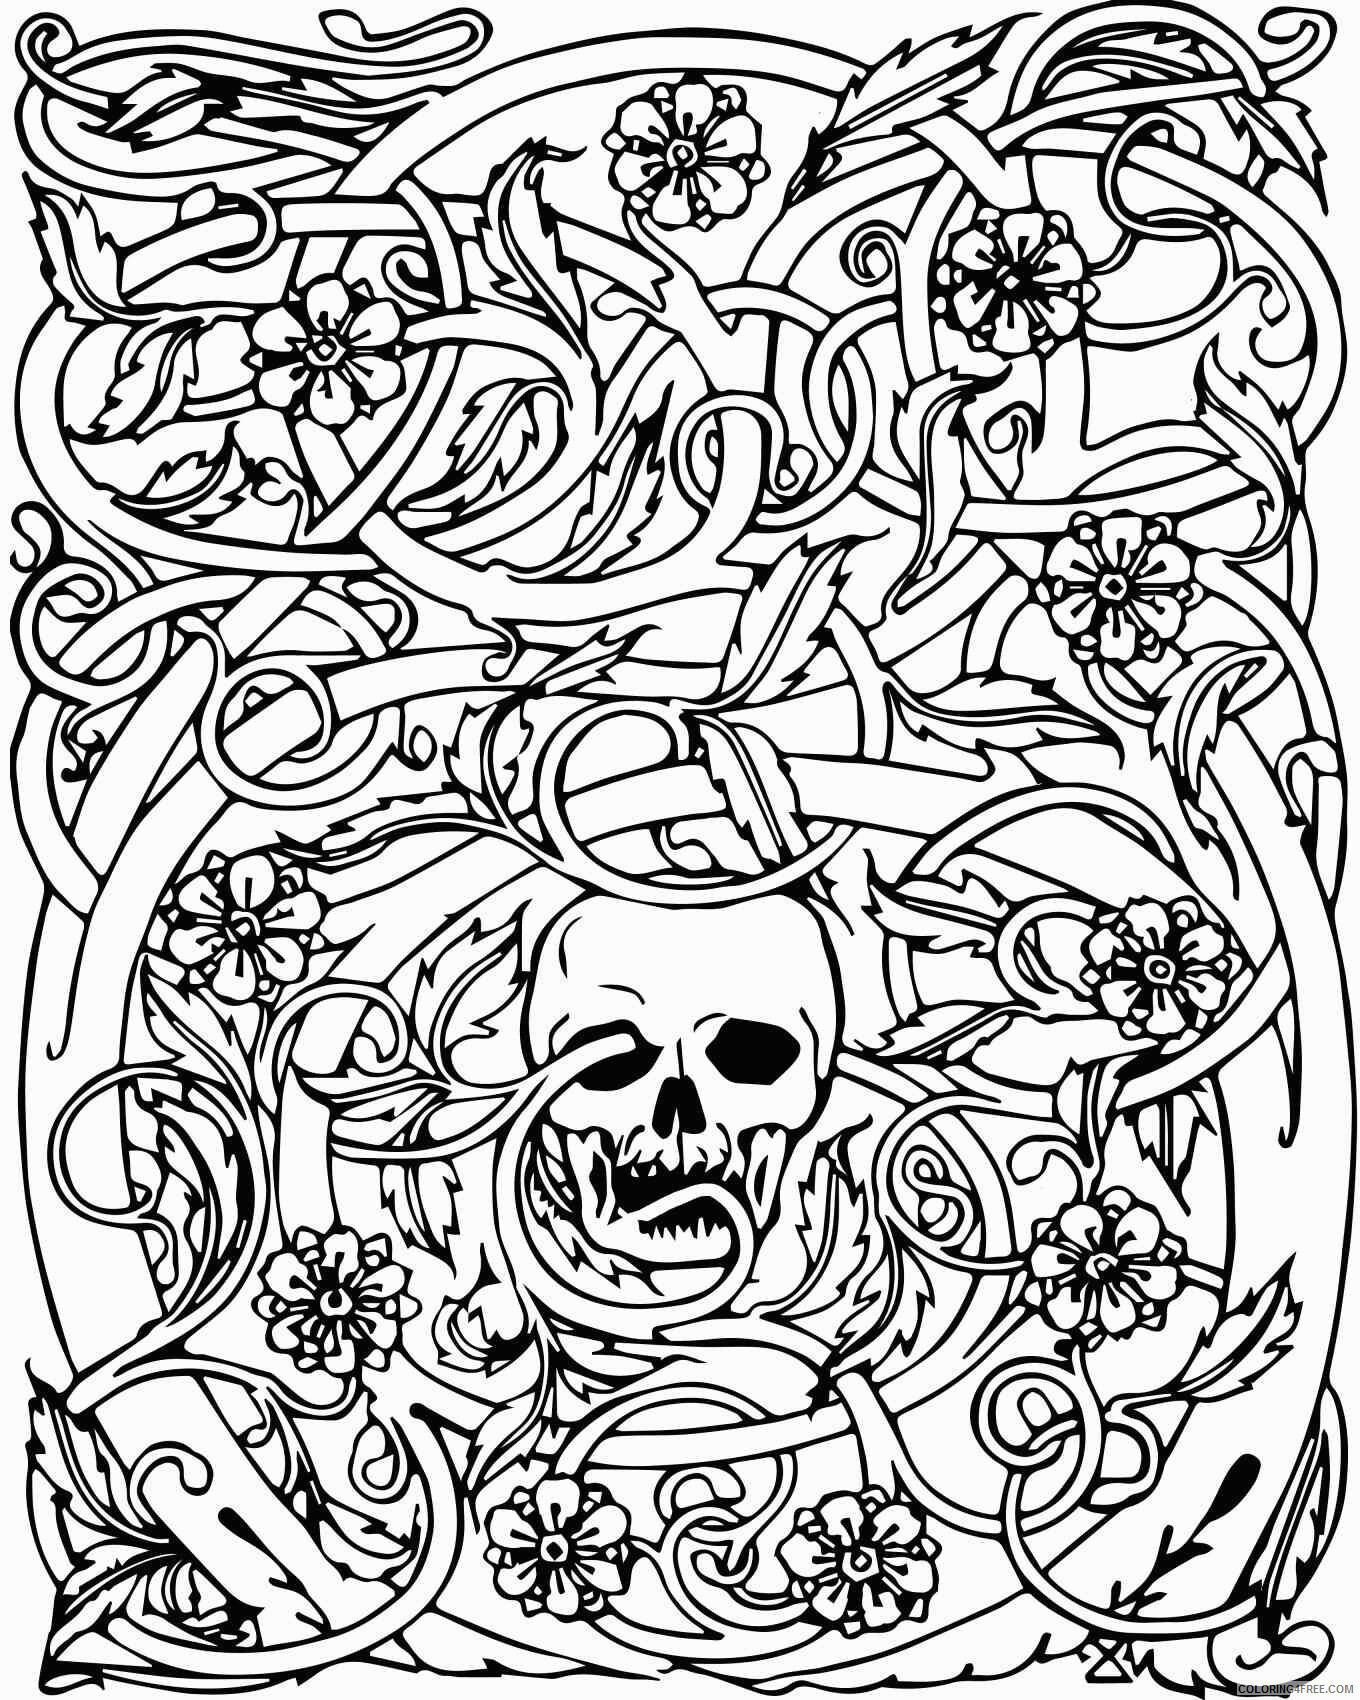 Skull Coloring Pages Skull Design Printable 2021 5456 Coloring4free